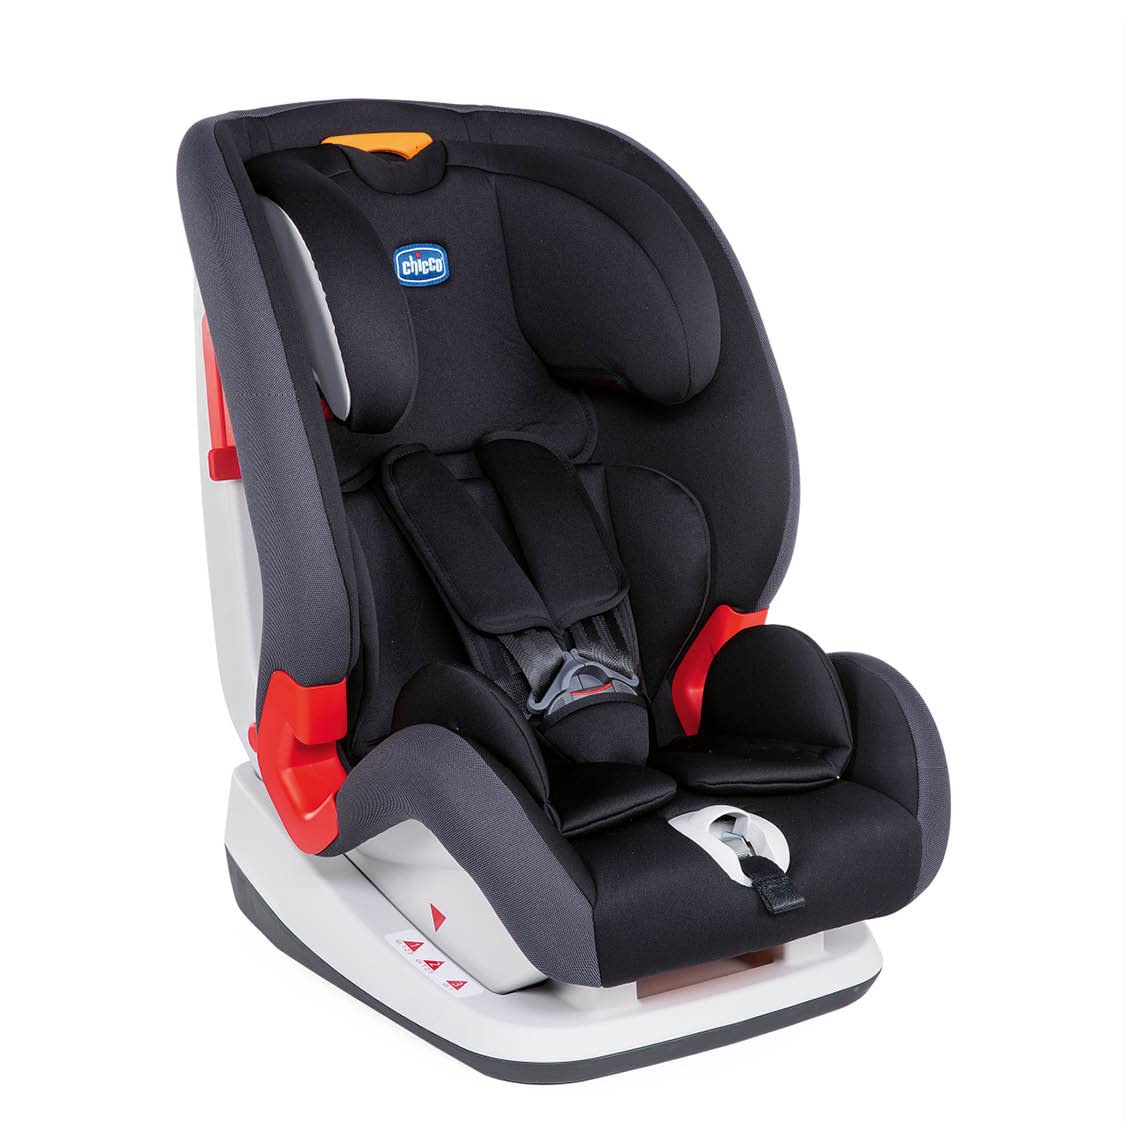 Chicco Youniverse Child Seat Jet Black Size 1/2/3